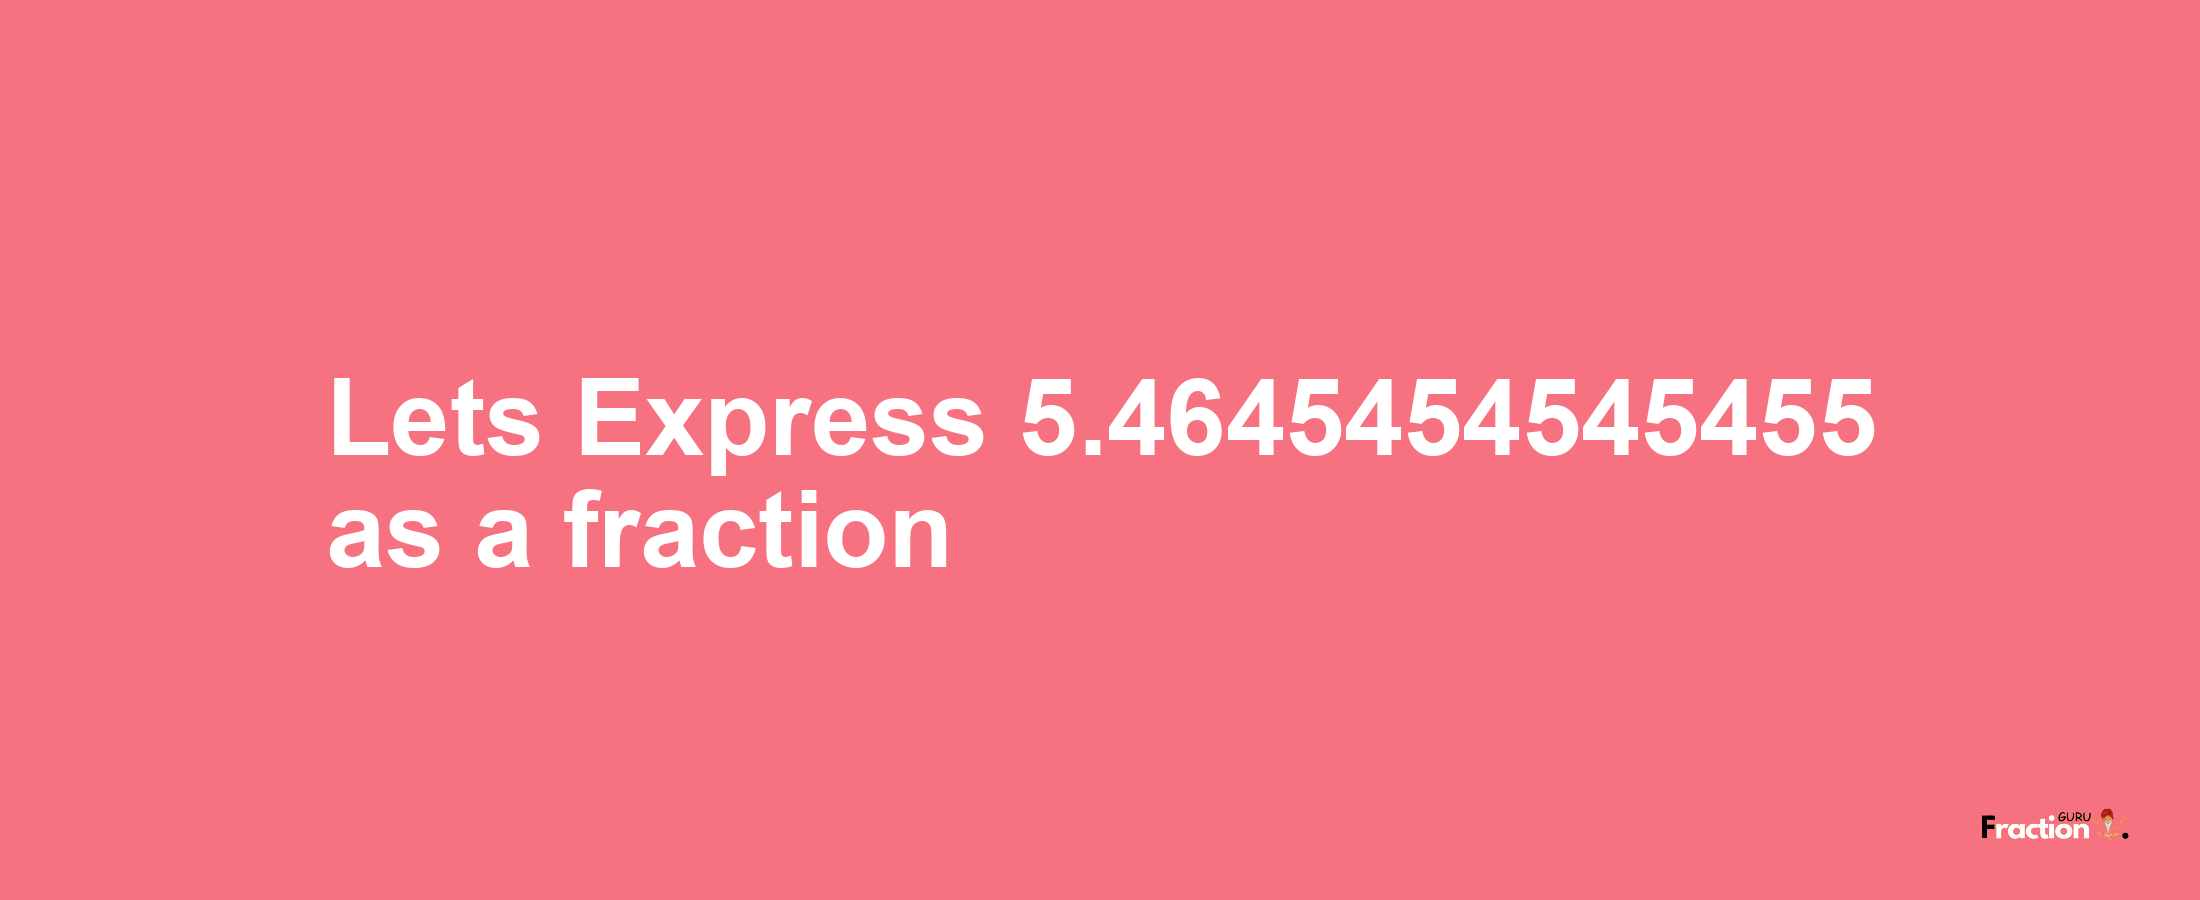 Lets Express 5.4645454545455 as afraction